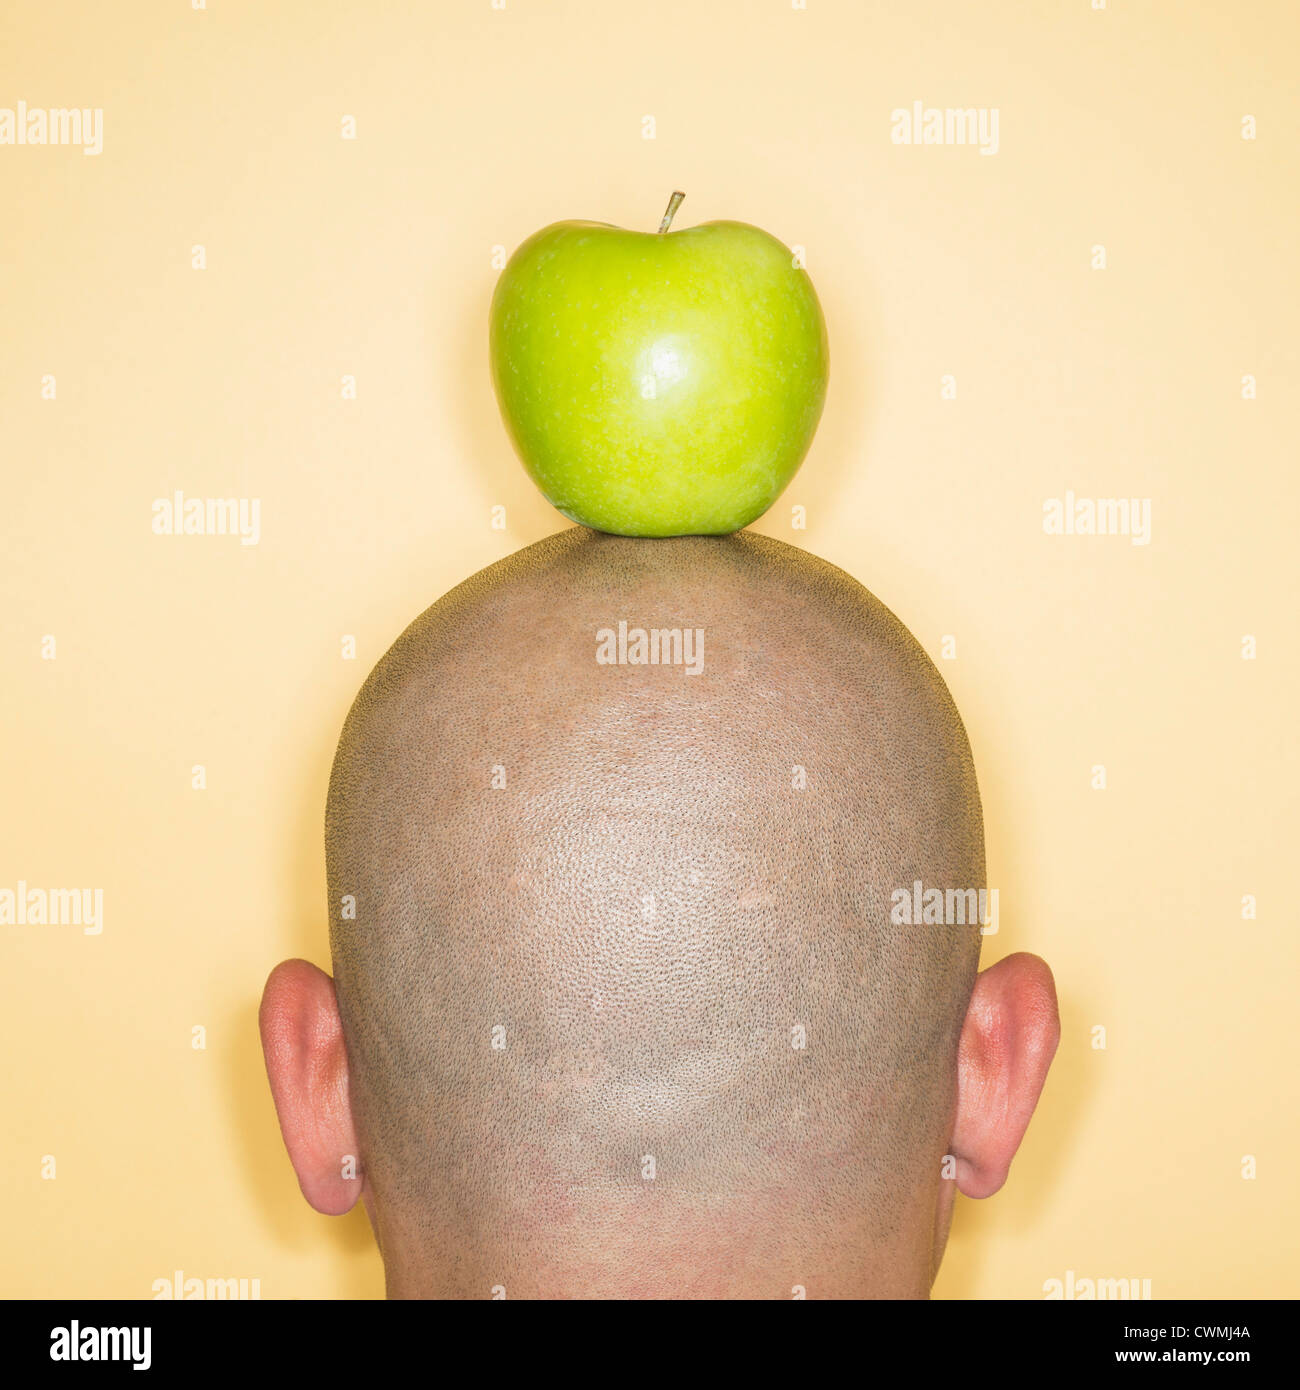 Back view of man with apple on head Stock Photo